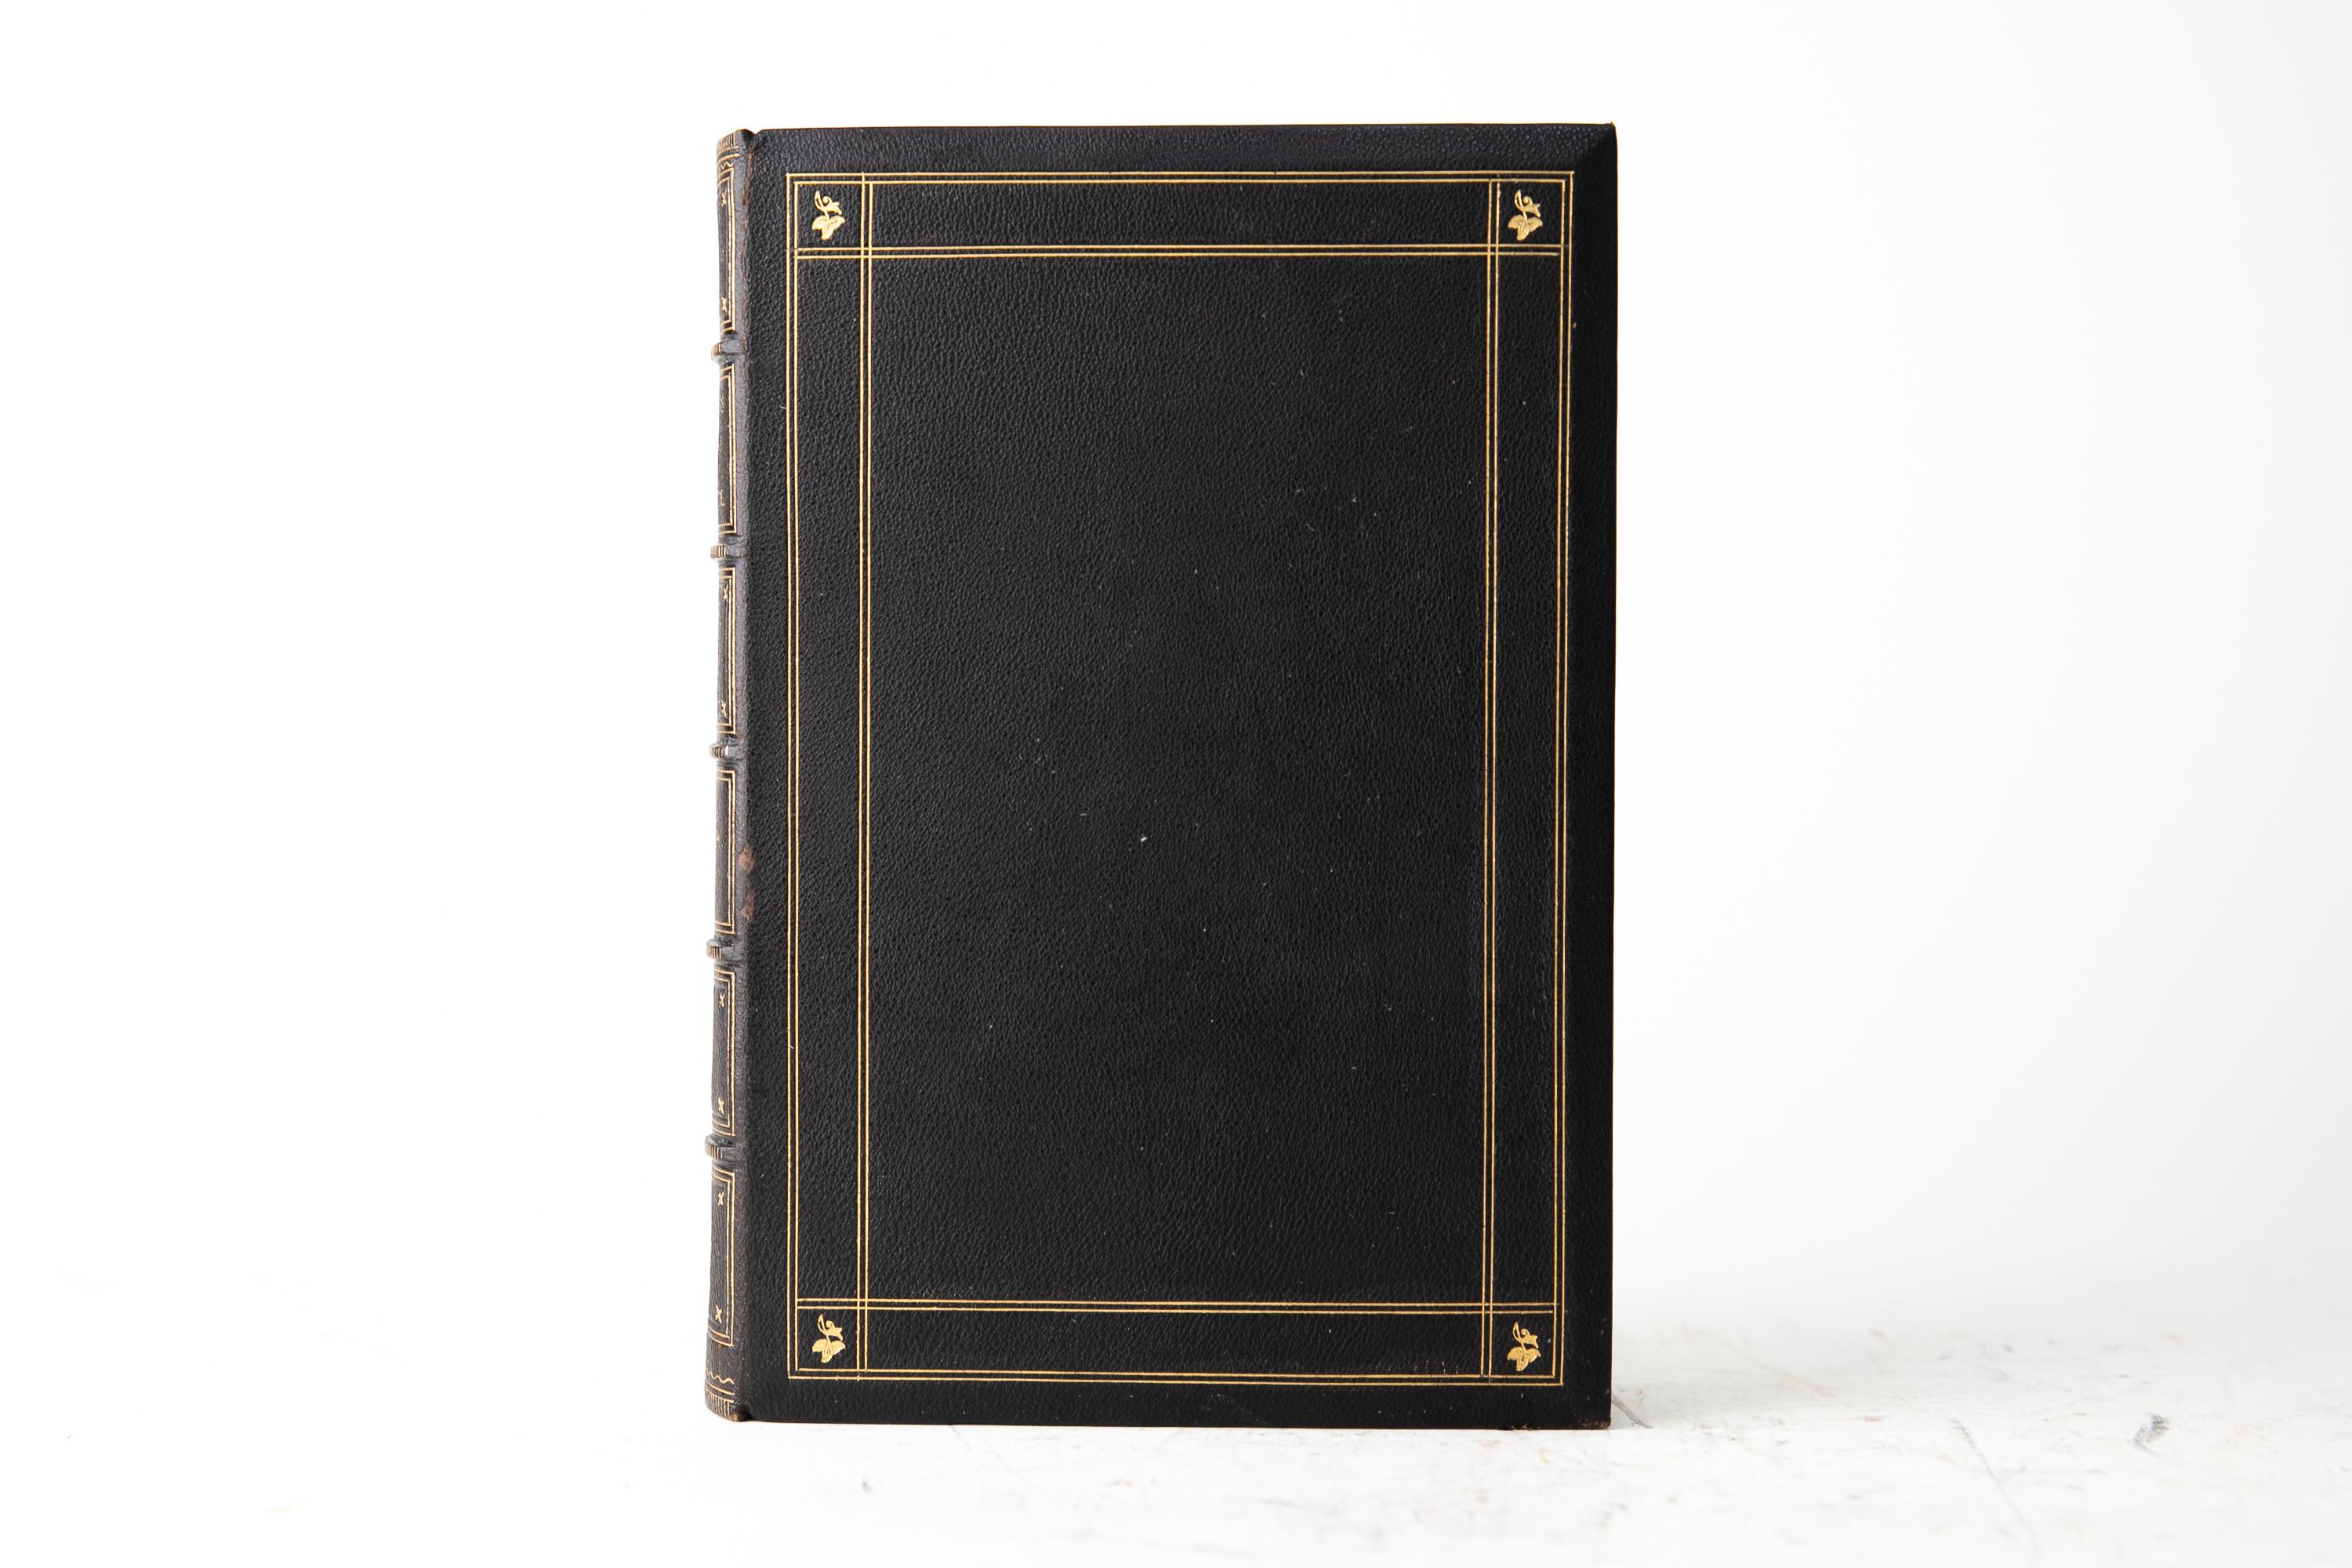 3 Volumes. John Ruskin, The Stones of Venice. Second Edition. Bound in full brown morocco with the covers and raised band spines displaying gilt-tooling. All edges gilt with gilt-tooled dentelles and marbled endpapers. Illustrations drawn by the